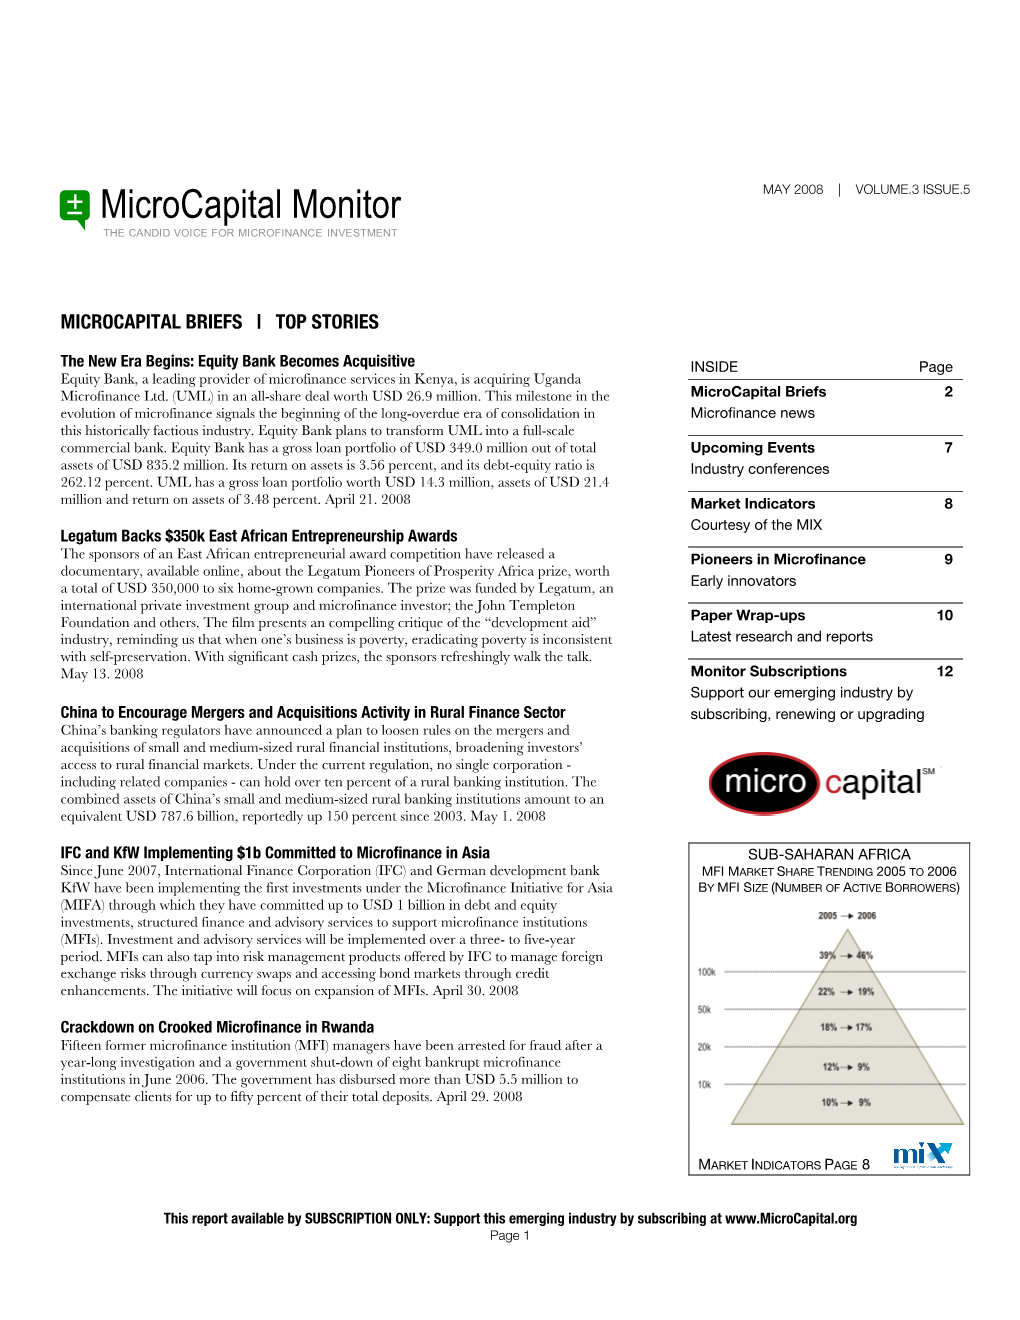 Microcapital Monitor MAY 2008 | VOLUME.3 ISSUE.5 the CANDID VOICE for MICROFINANCE INVESTMENT